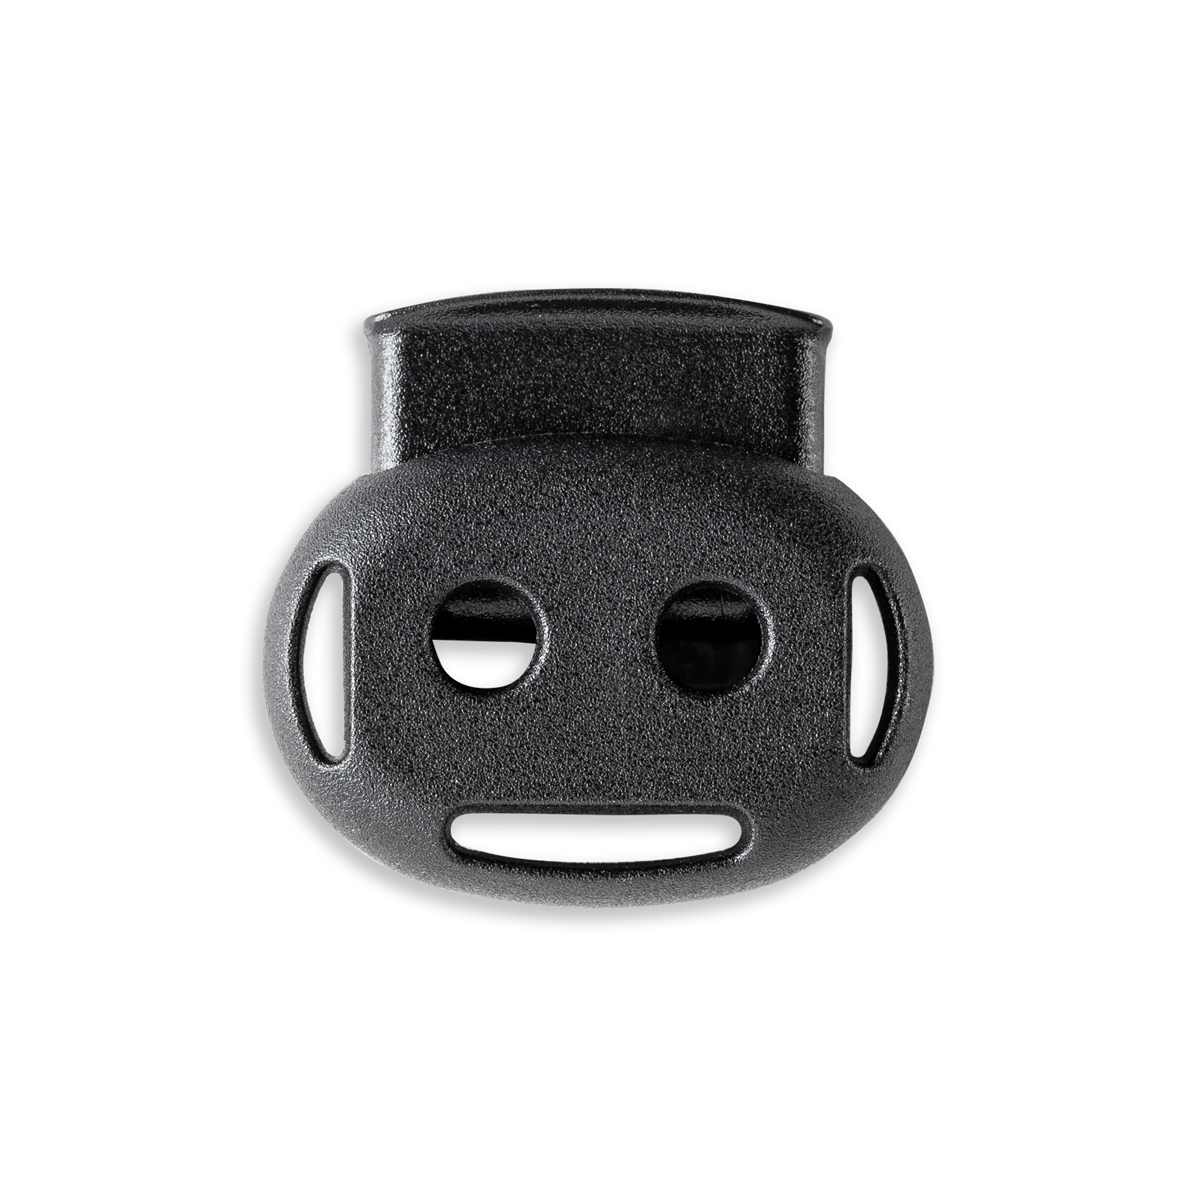 Big Hole Cord Lock With Two Big String Holes - 8mm(D)=5/16(D) 